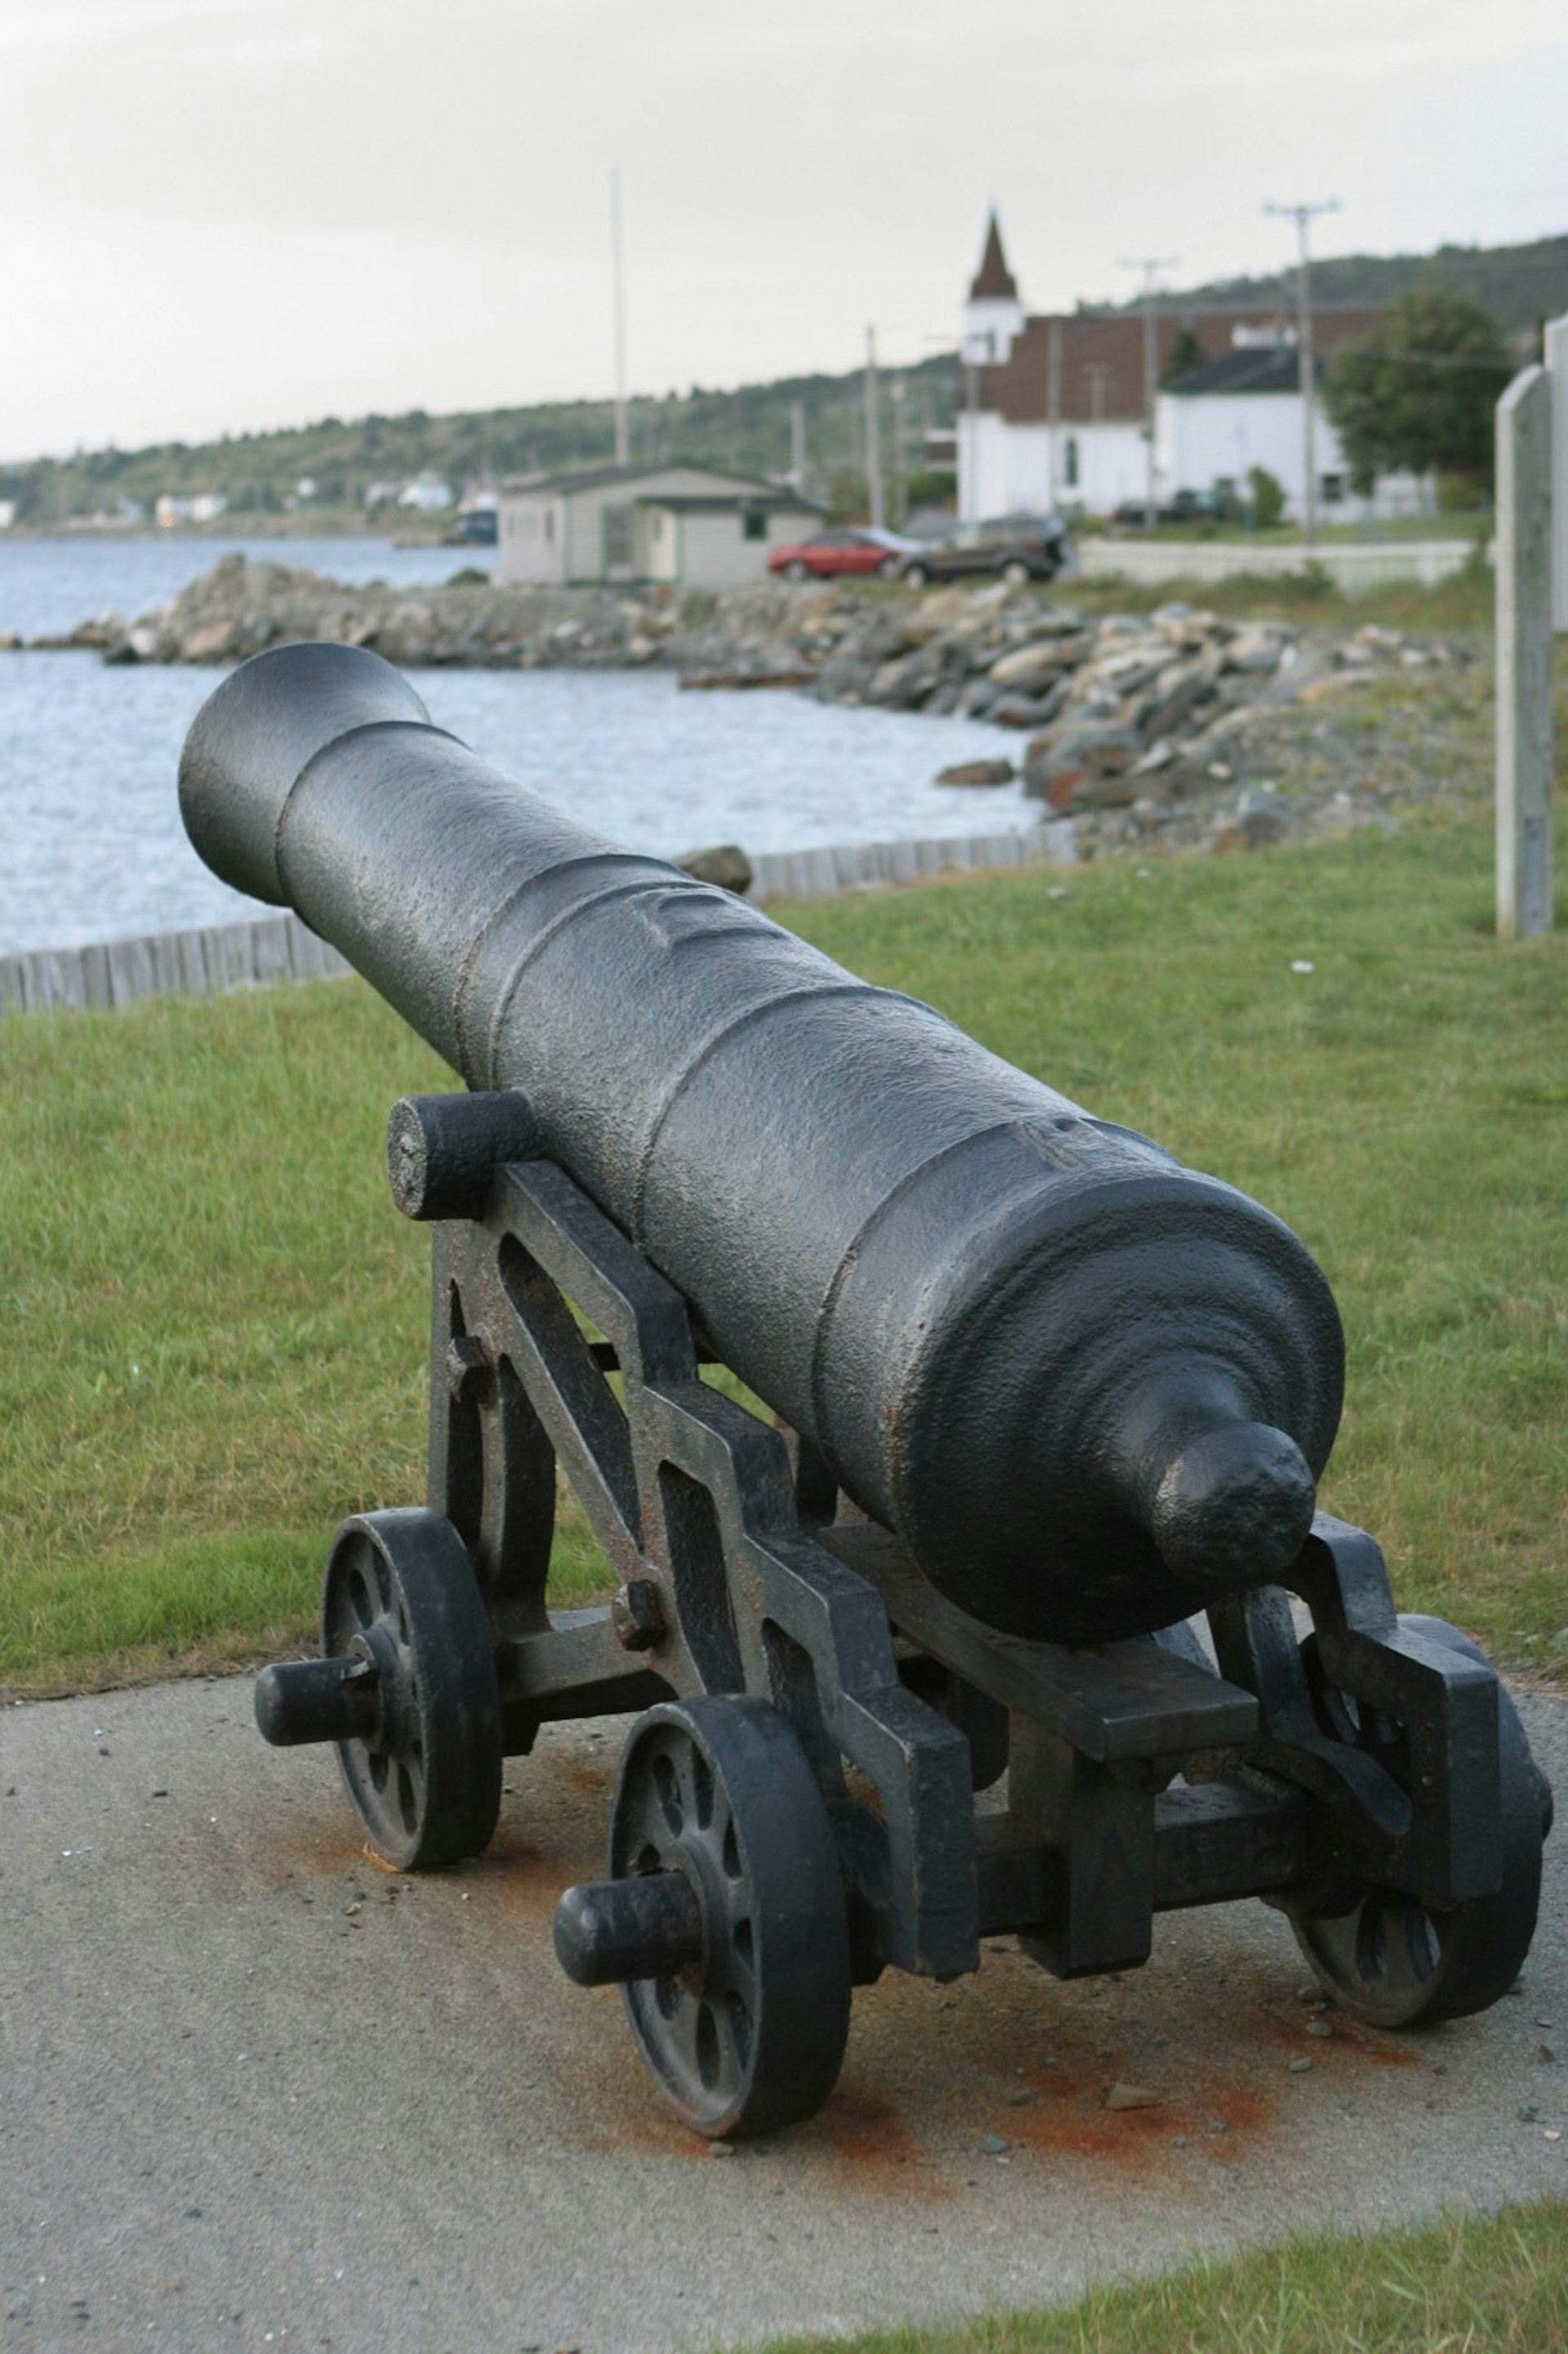 On an overcast and foggy day, an old cannon mounted on wheels is pointed out into Conception Bay with the town and church in the background in the early 1610 settlement of Cupids, Newfoundland.